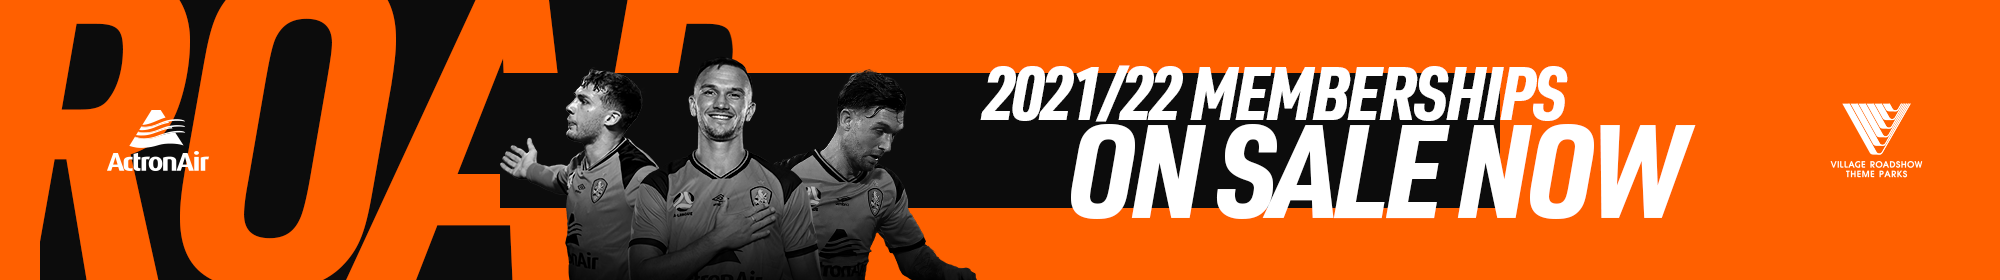 2021/22 Memberships On Sale Now banner